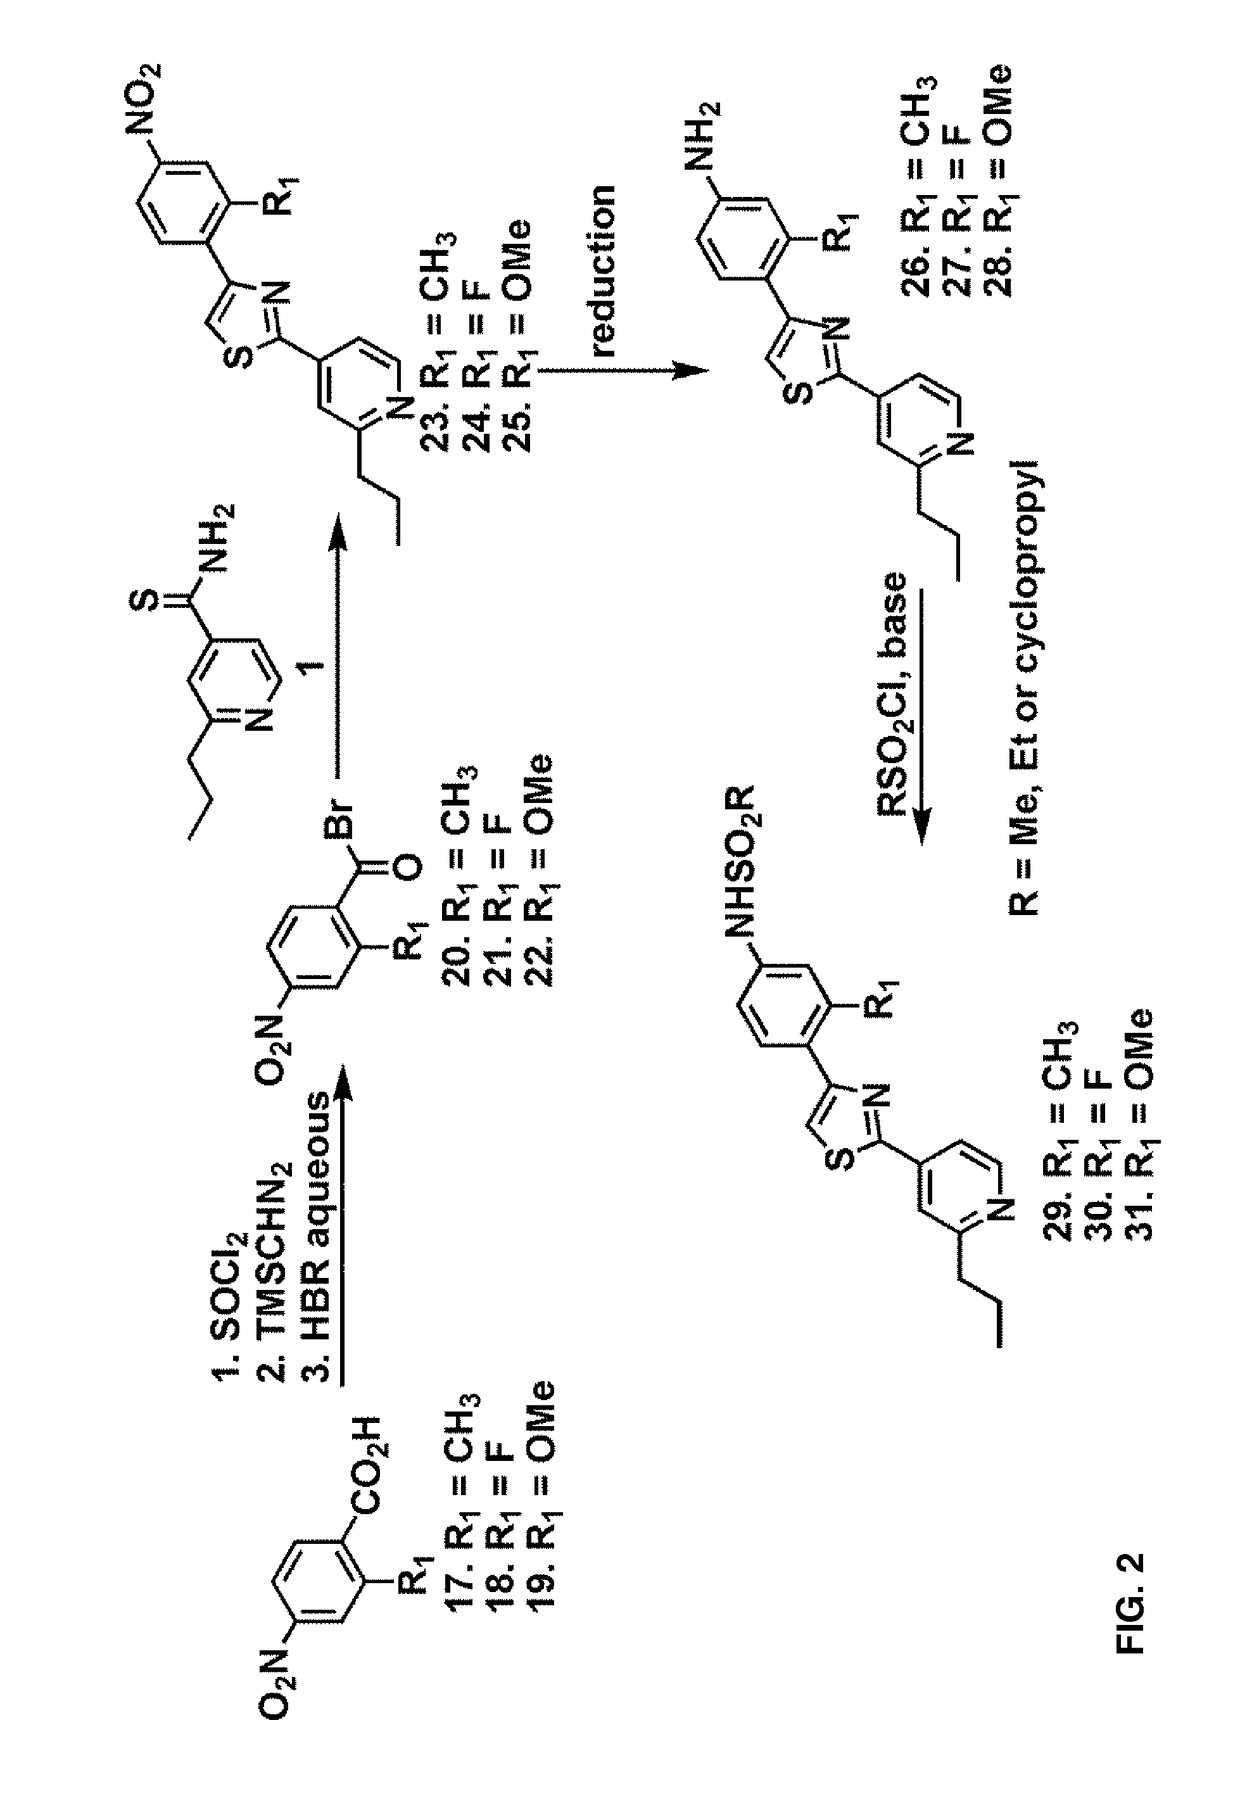 Compositions of fatostatin based heterocyclic compounds and uses thereof